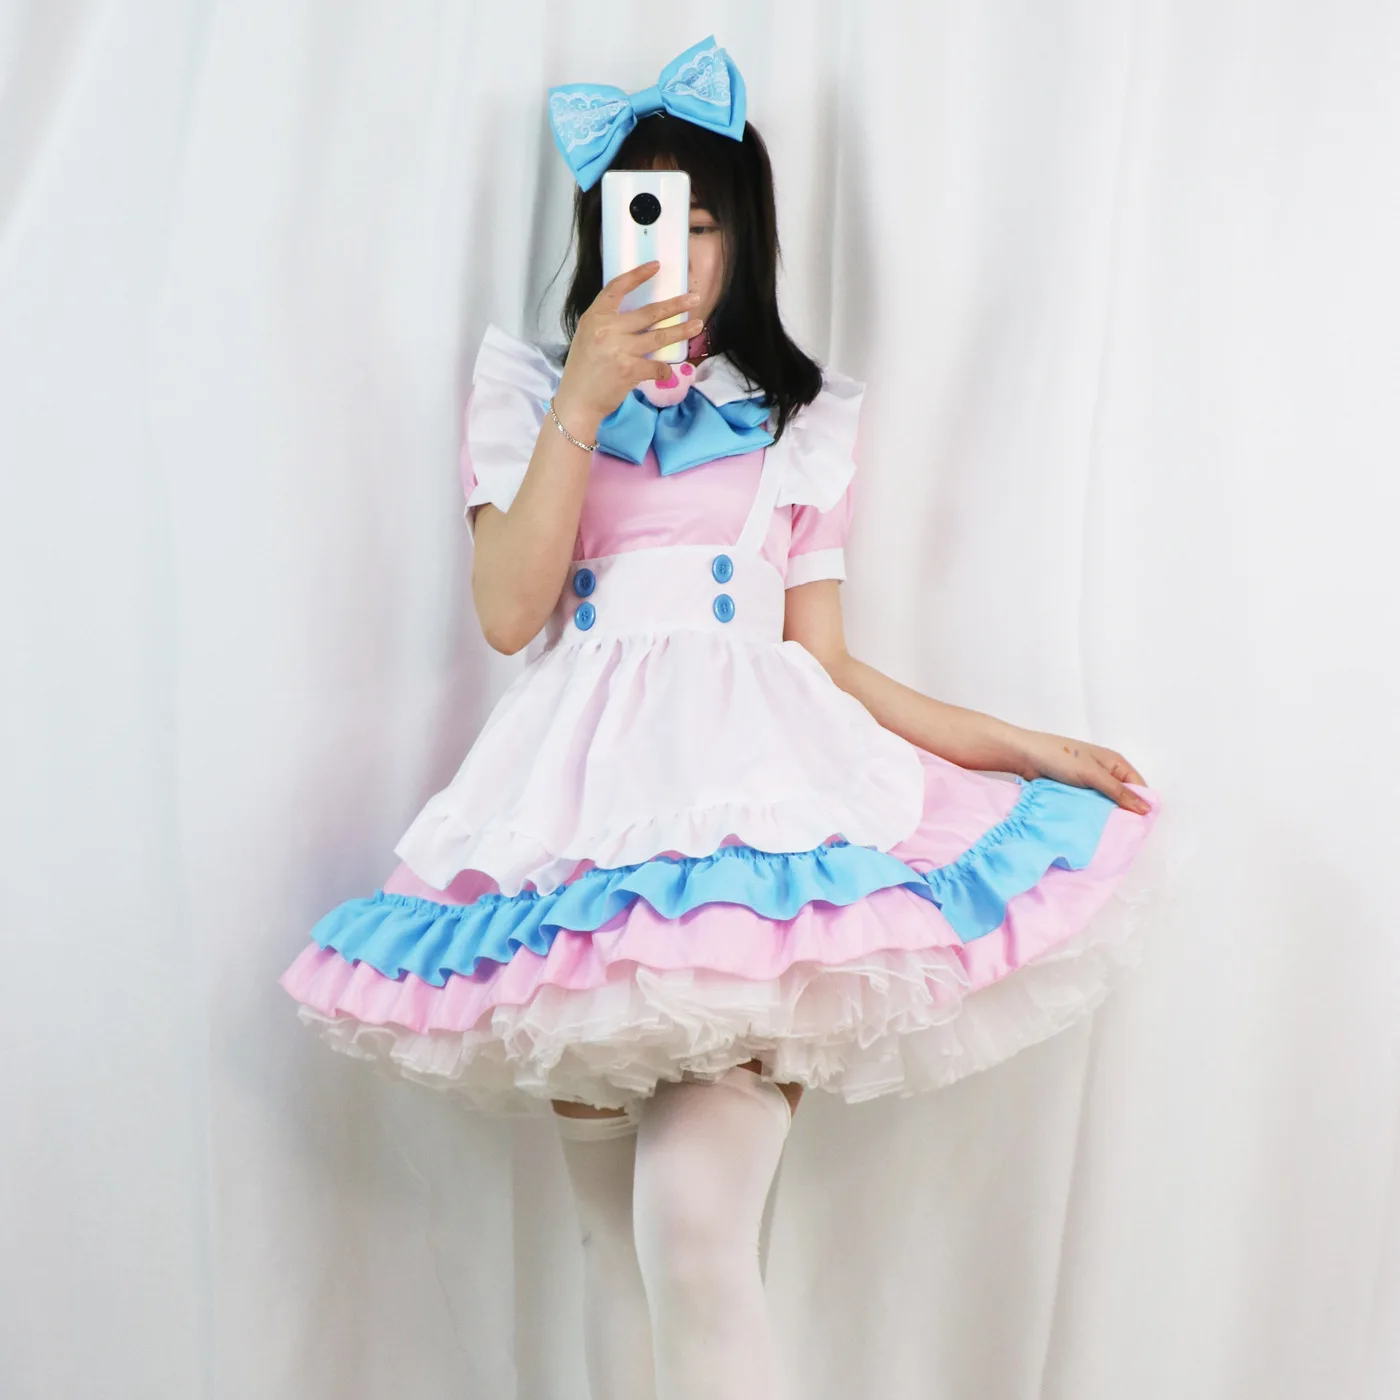 

Plus Size Maid Outfit Super Cute Pink Blue Lolita Women's Dress With Big Bowknot Big Guy Lolita Cute Skirt Cosplay Anime Clothes